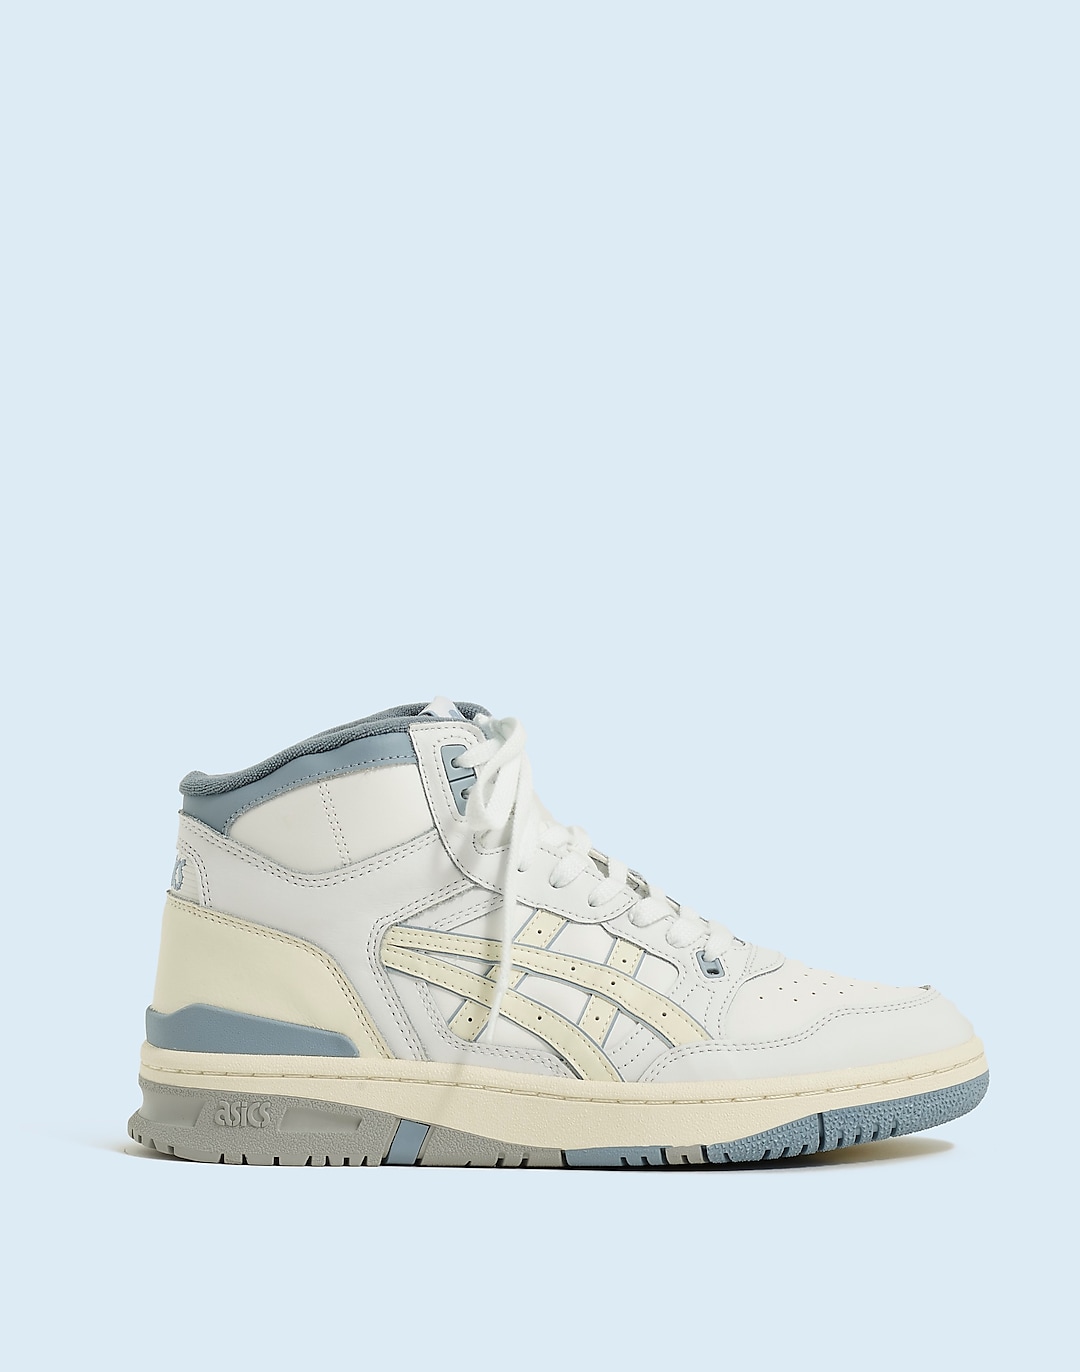 Asics® EX89 MT Sneakers | Madewell